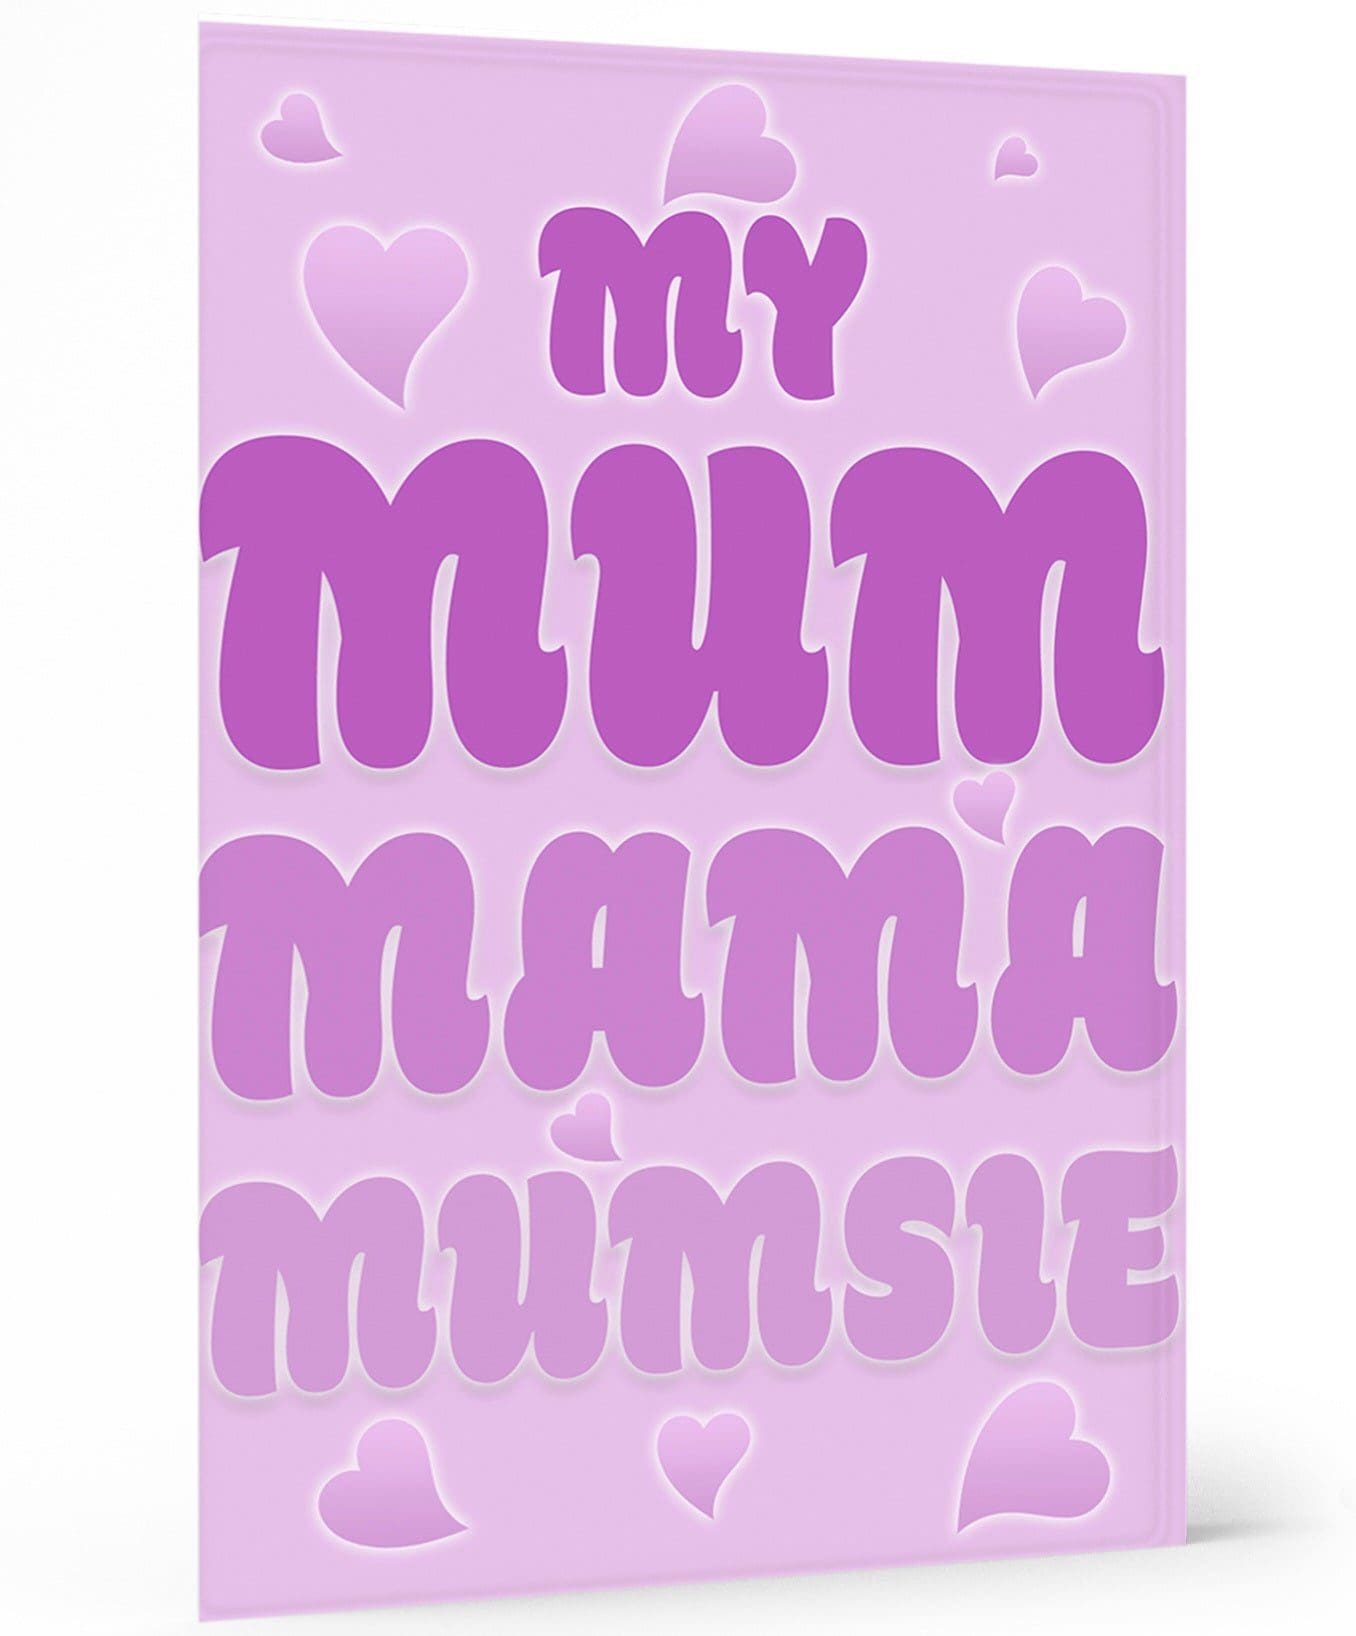 Mumsie Card, wakuda, african print fans, black-owned brands, black pound day